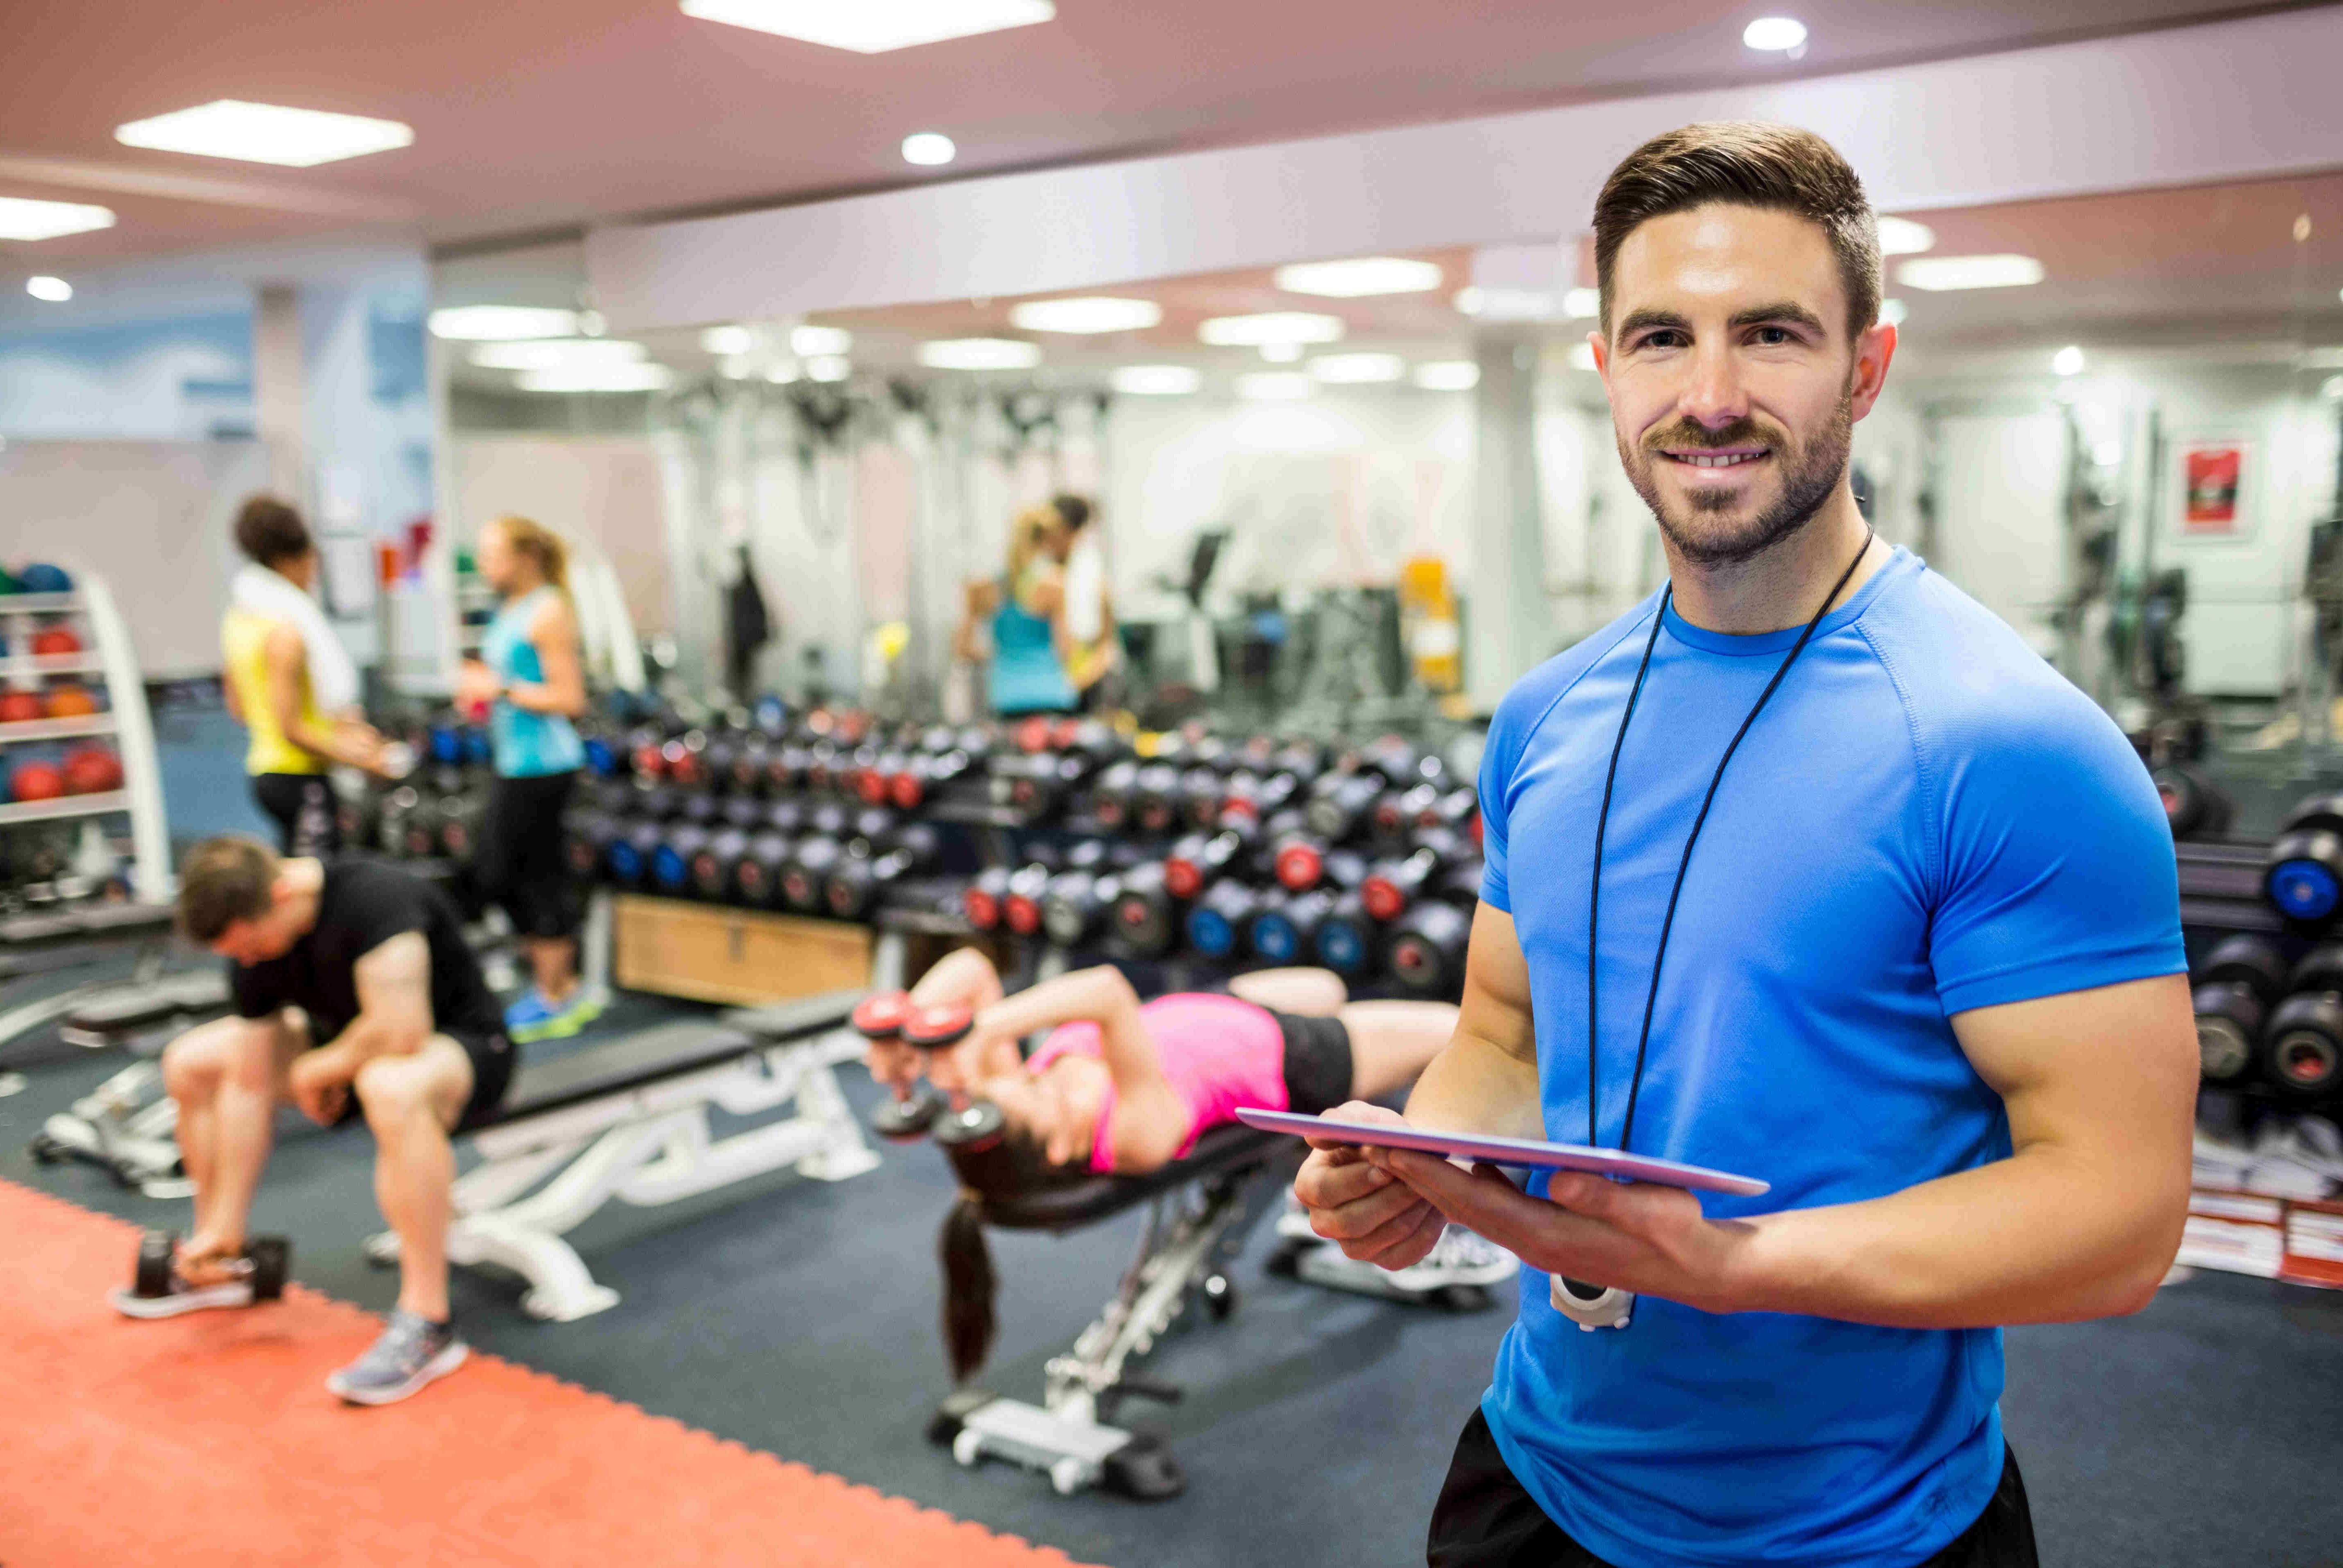 Personal trainer smiling with people exercising in the background